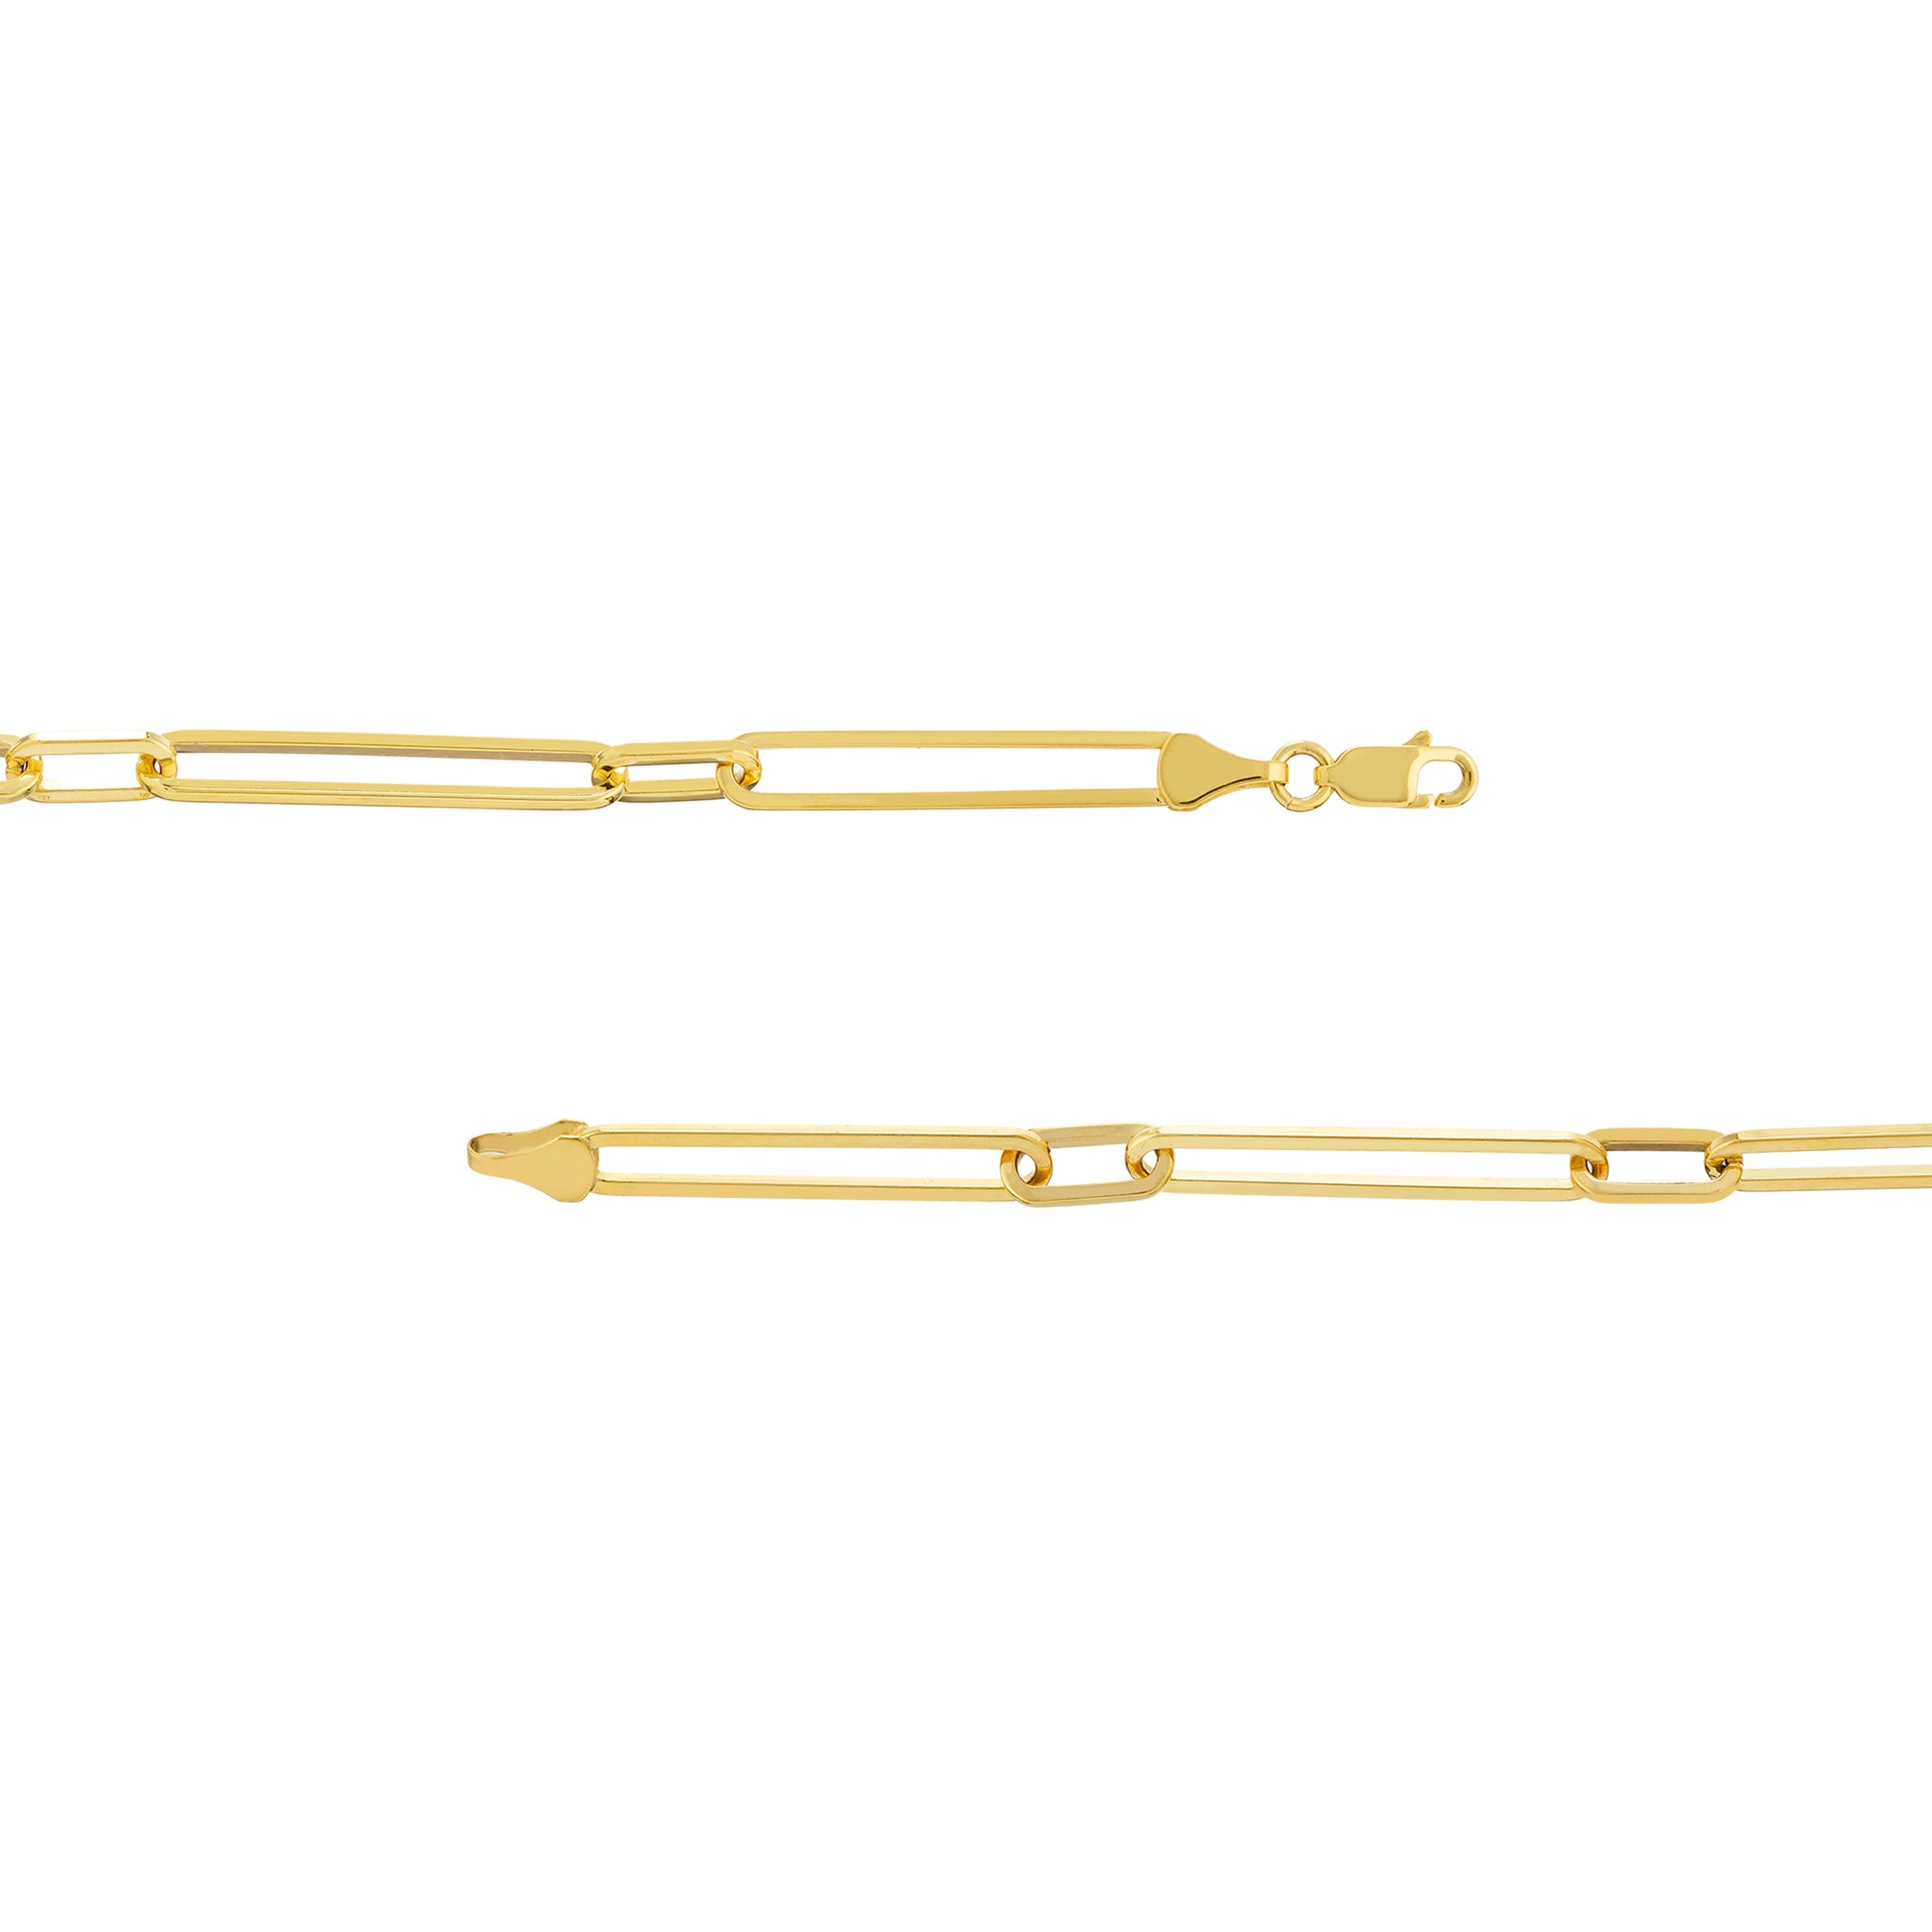 Hemsleys Collection 14K Yellow Gold 6mm Elongated Paperclip Necklace